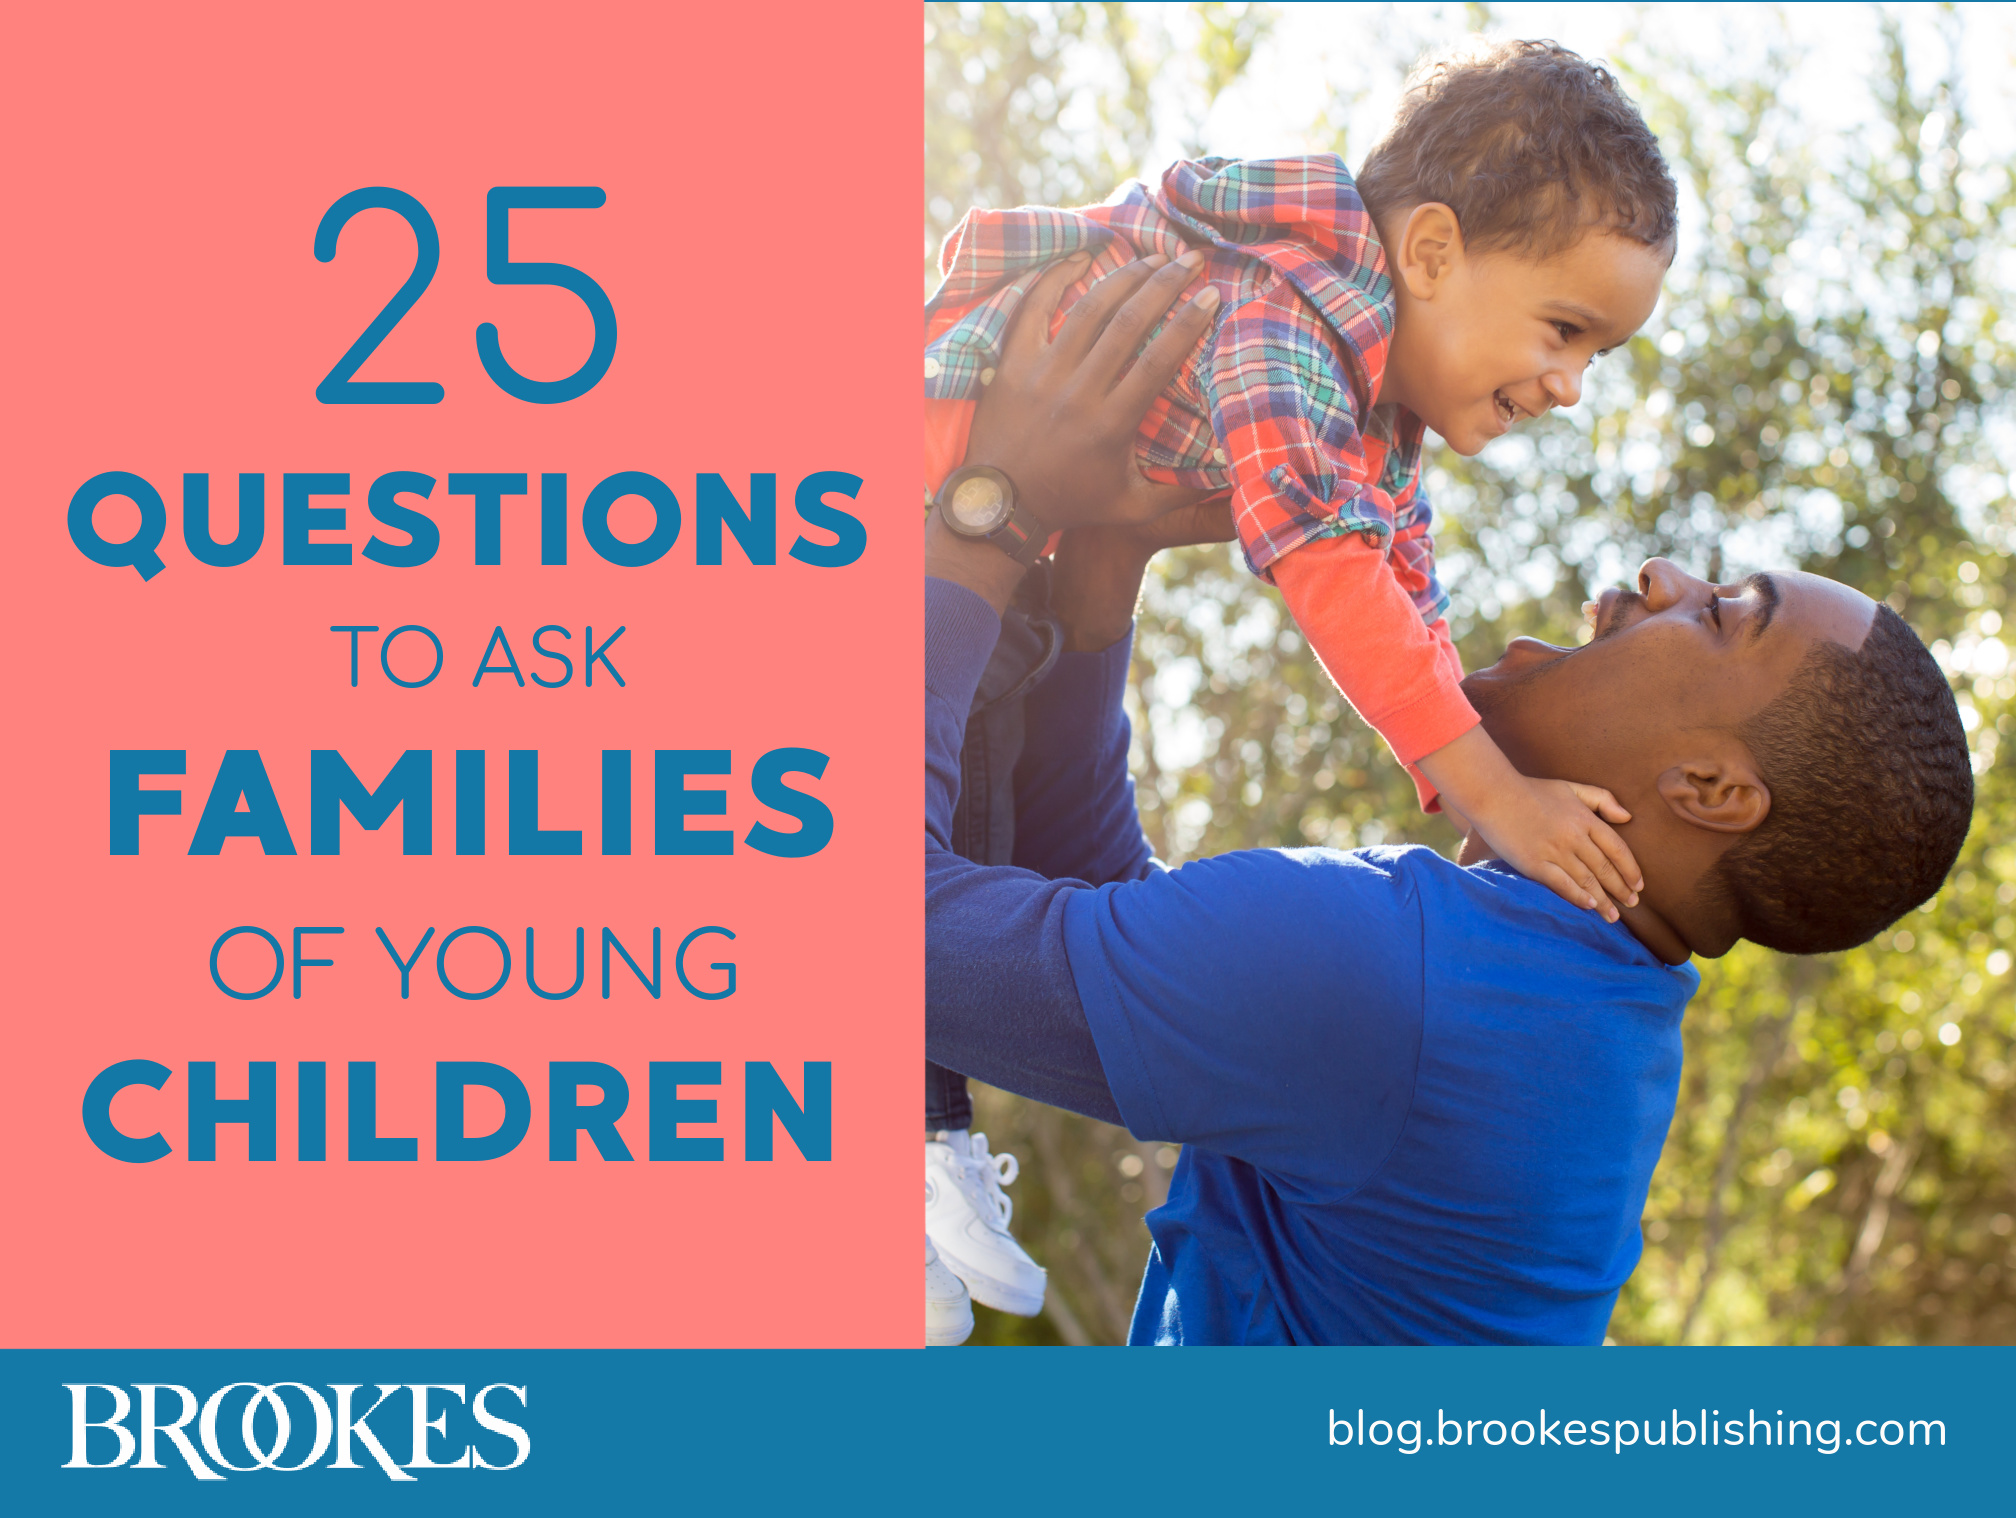 25 Questions Early Childhood Professionals Should Ask Families - Brookes  Blog